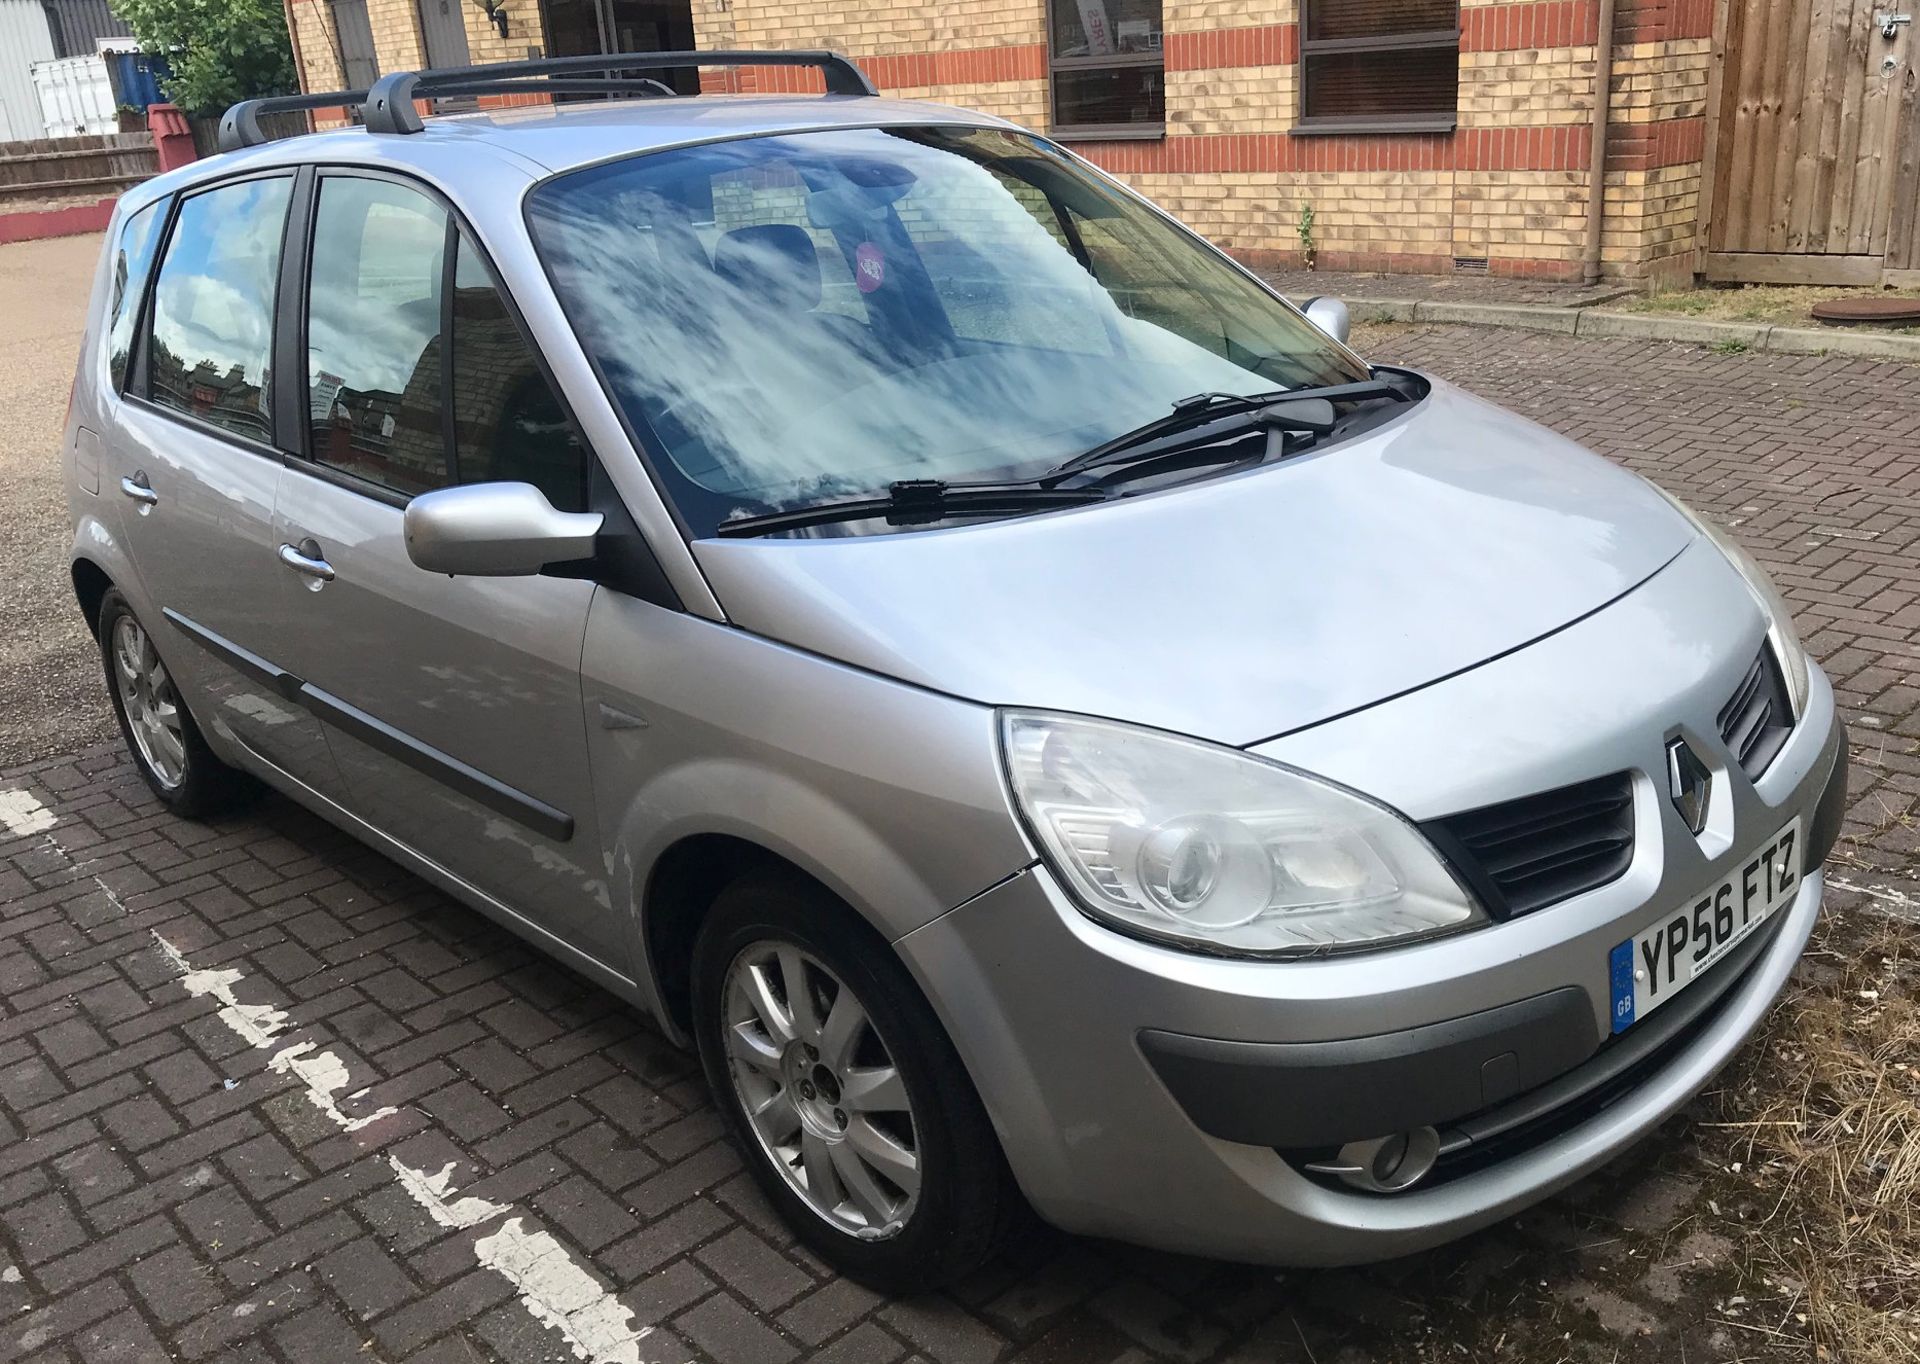 2006 Renault Scenic 1.6 VVT Dynamiq 5 Dr MPV - CL505 - NO VAT ON THE HAMMER - Location: Corby, Nort - Image 6 of 12